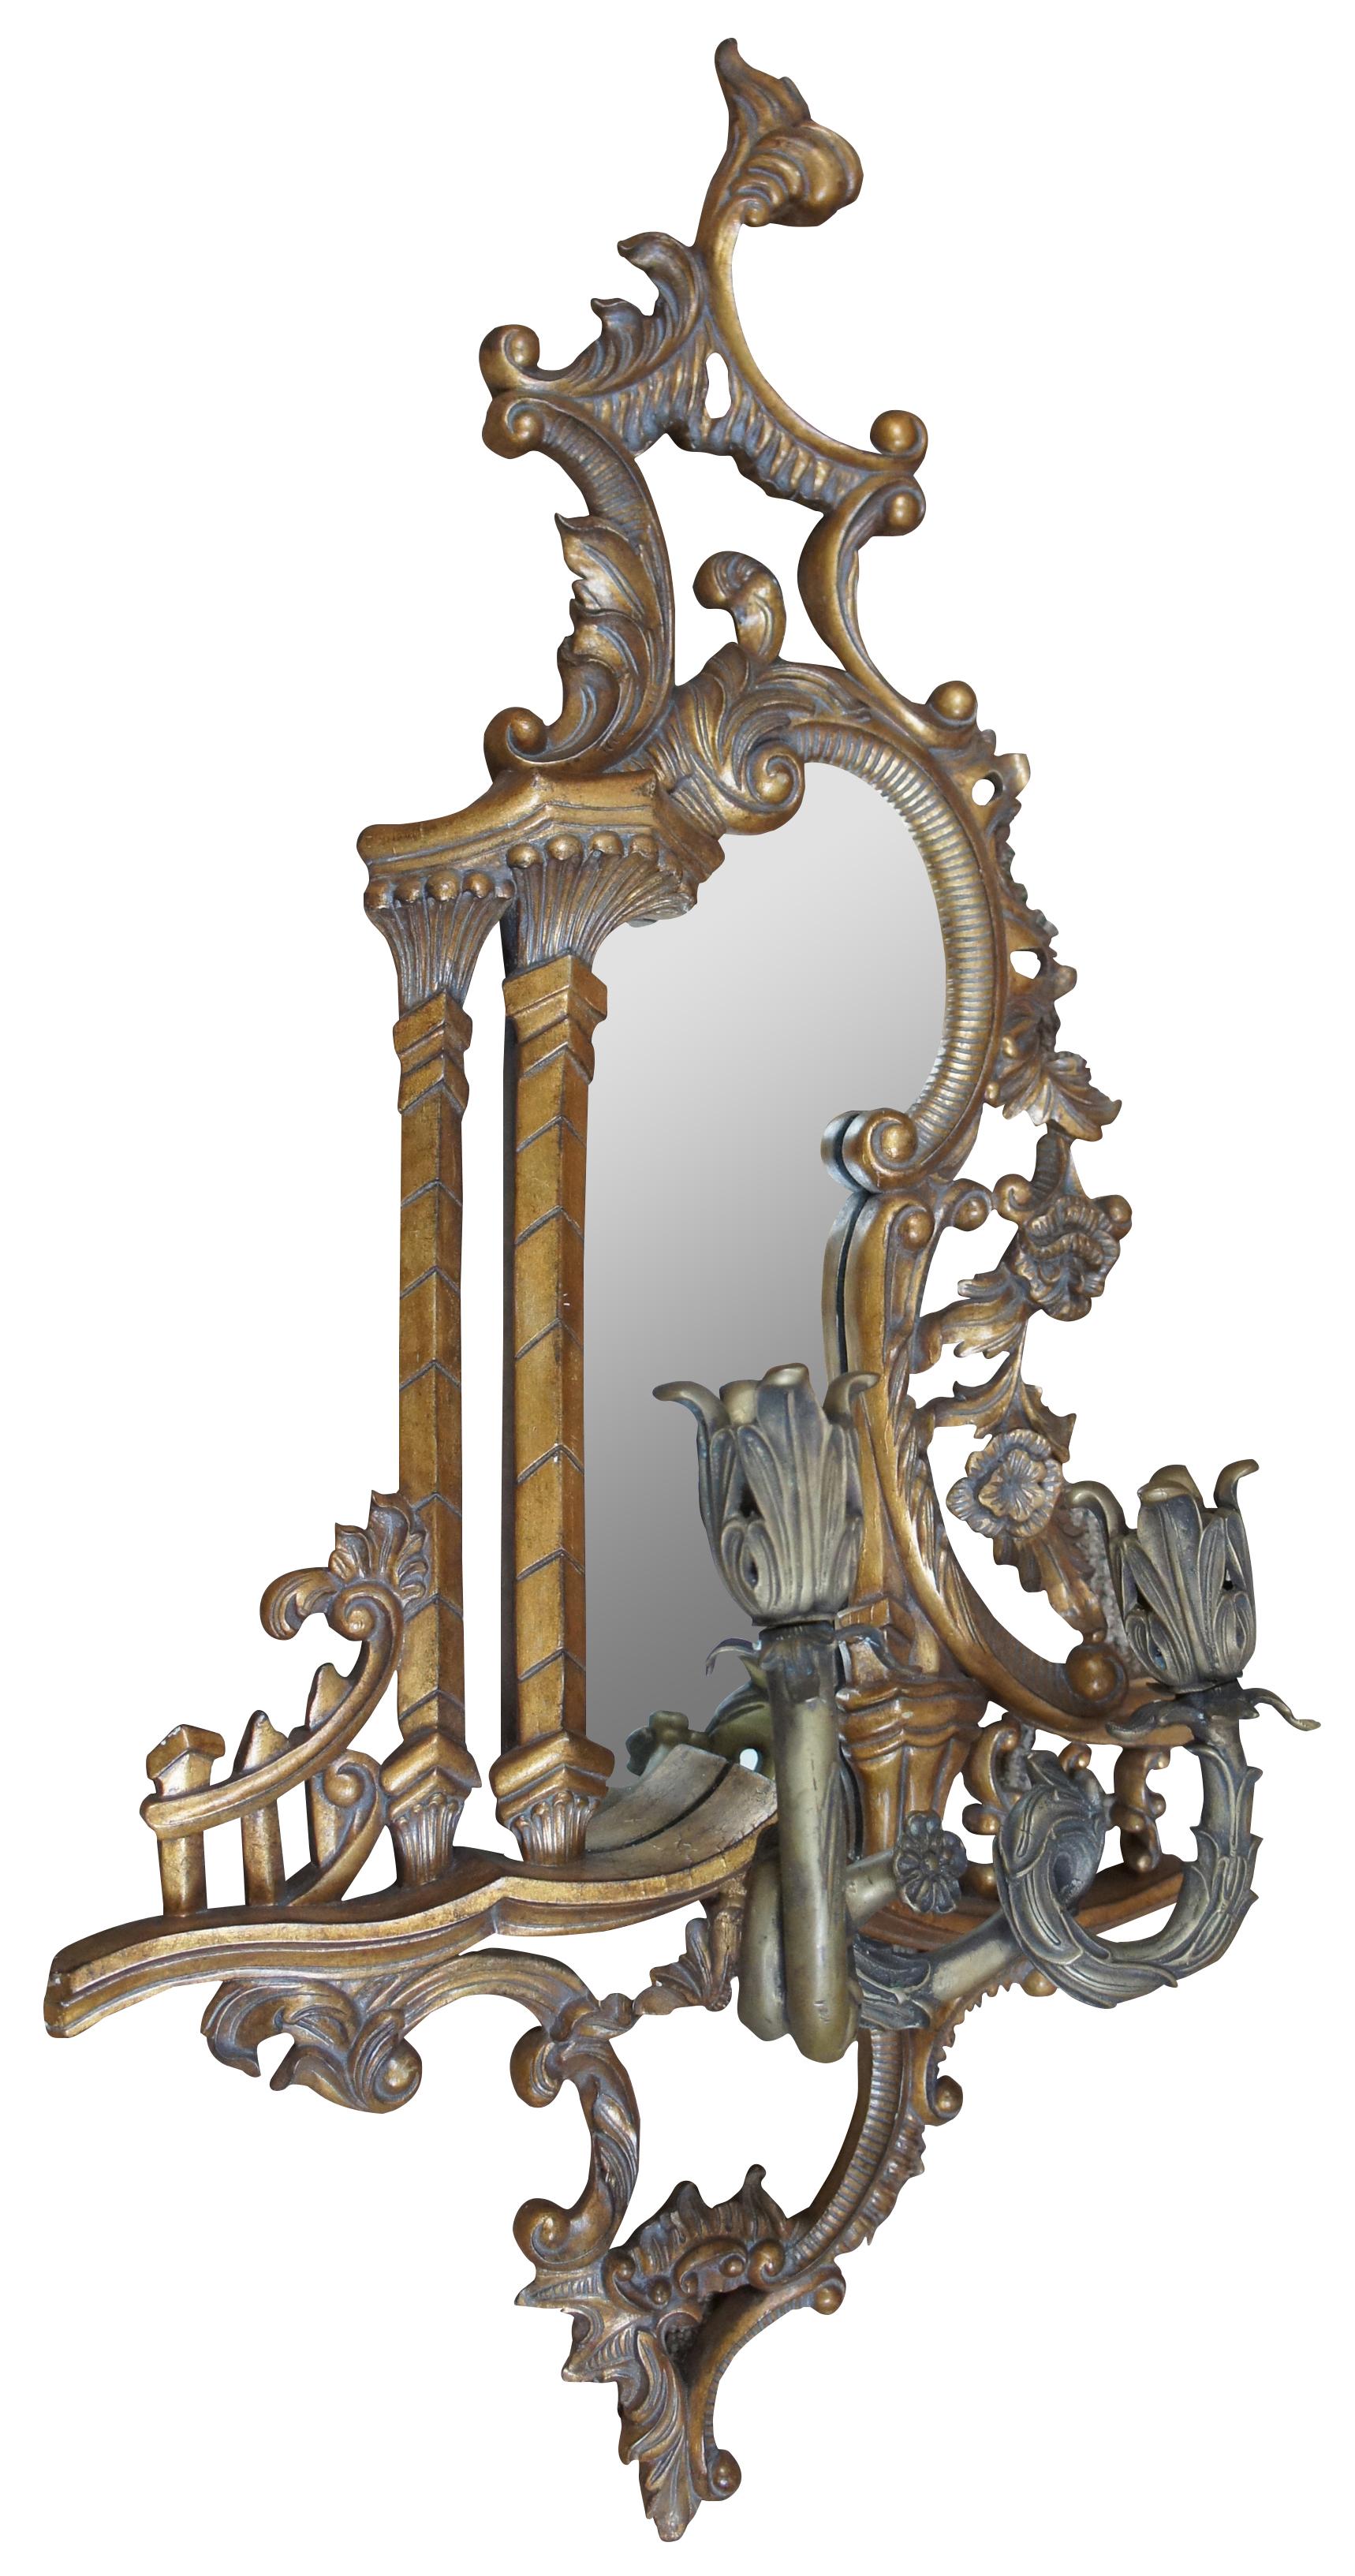 Ornate pair of Baroque or Rococo style gold wall mirrors with two brass floral candleholders by Maitland Smith. Made in Indonesia, Product Info - 1648-013, 3S05148-0010, 439G-MSI. Measure: 40